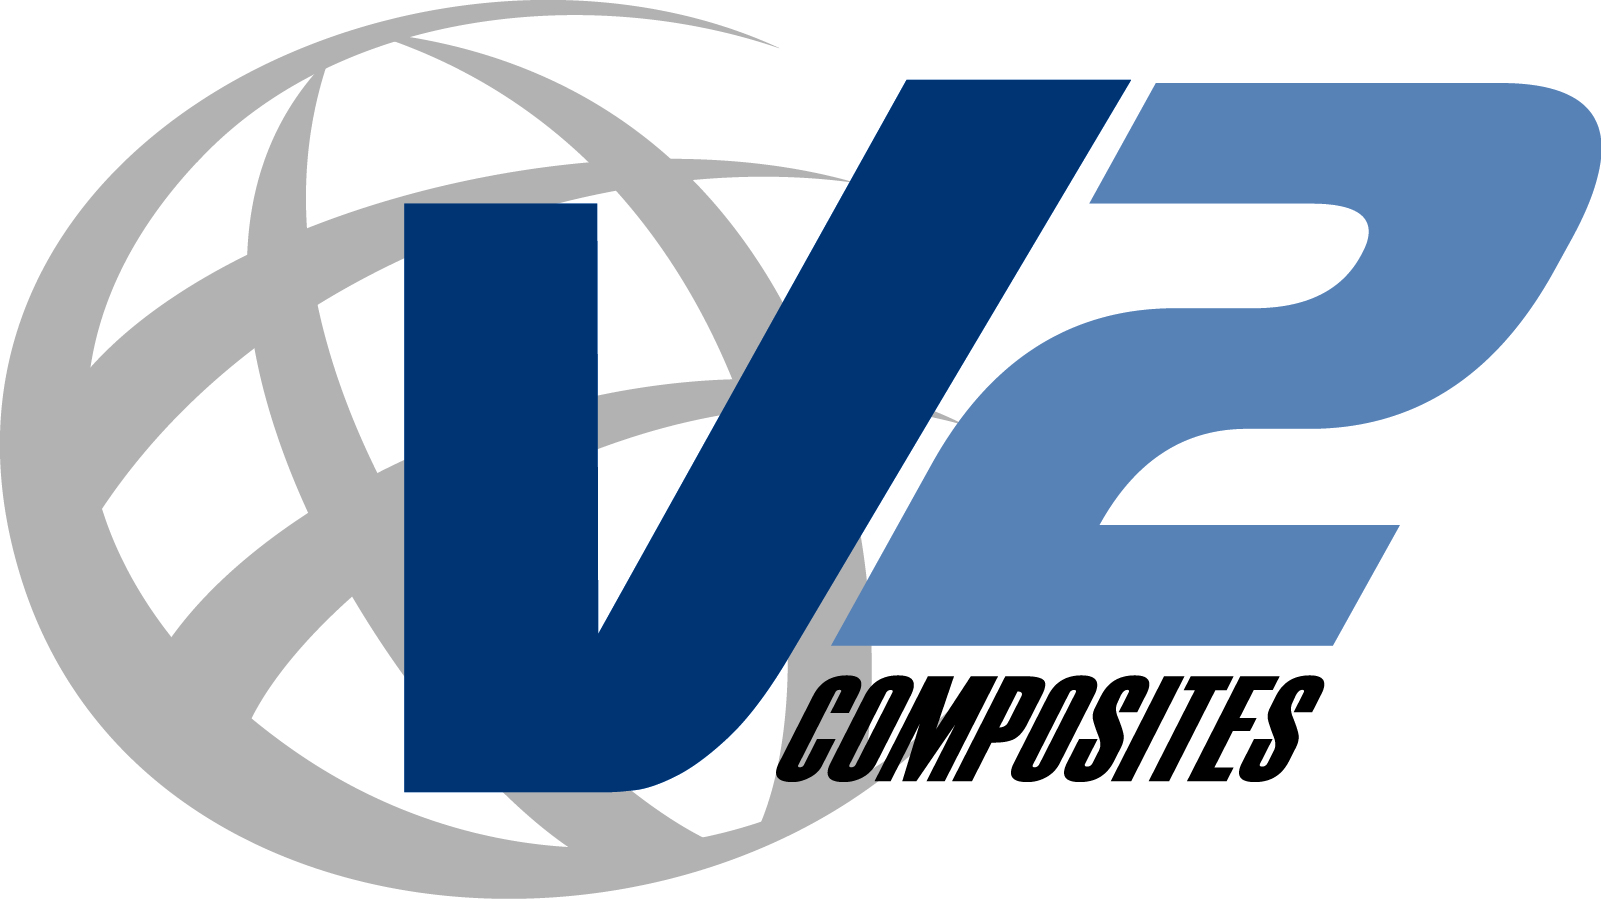 V2 Composites, Inc. designs and fabricates some of the industry's strongest and most versatile composite reinforcement solutions.